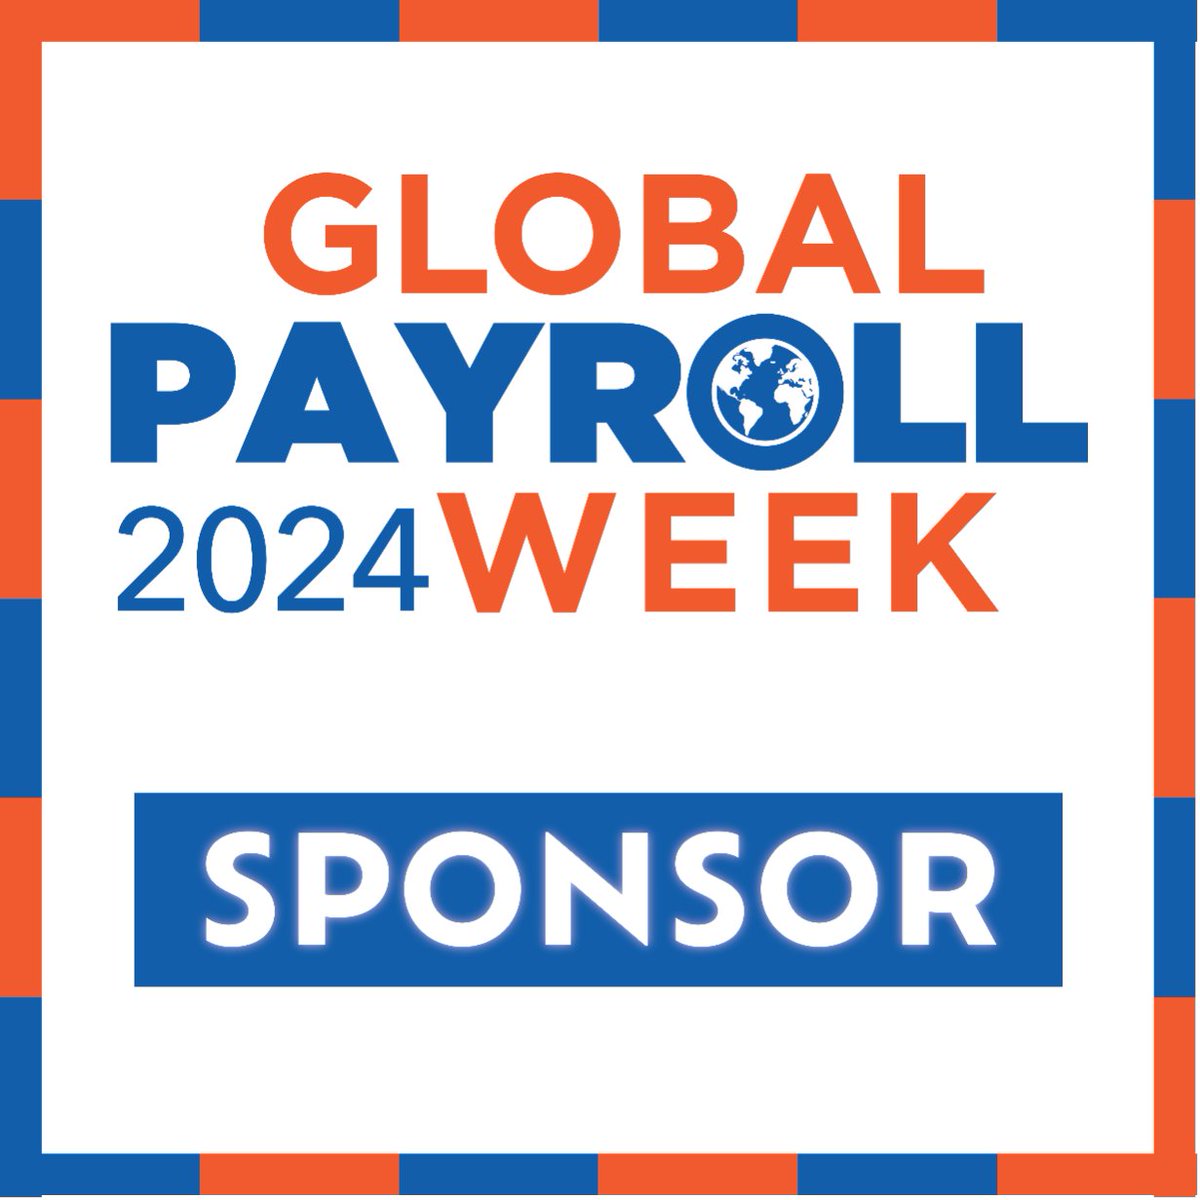 We’re proud to sponsor Global Payroll Week 2024! Make sure to thank the hard-working #payroll professionals in your life for the essential job they do for the #globalpayroll workforce. #globalpayweek

To learn more: bit.ly/3QleV7Q